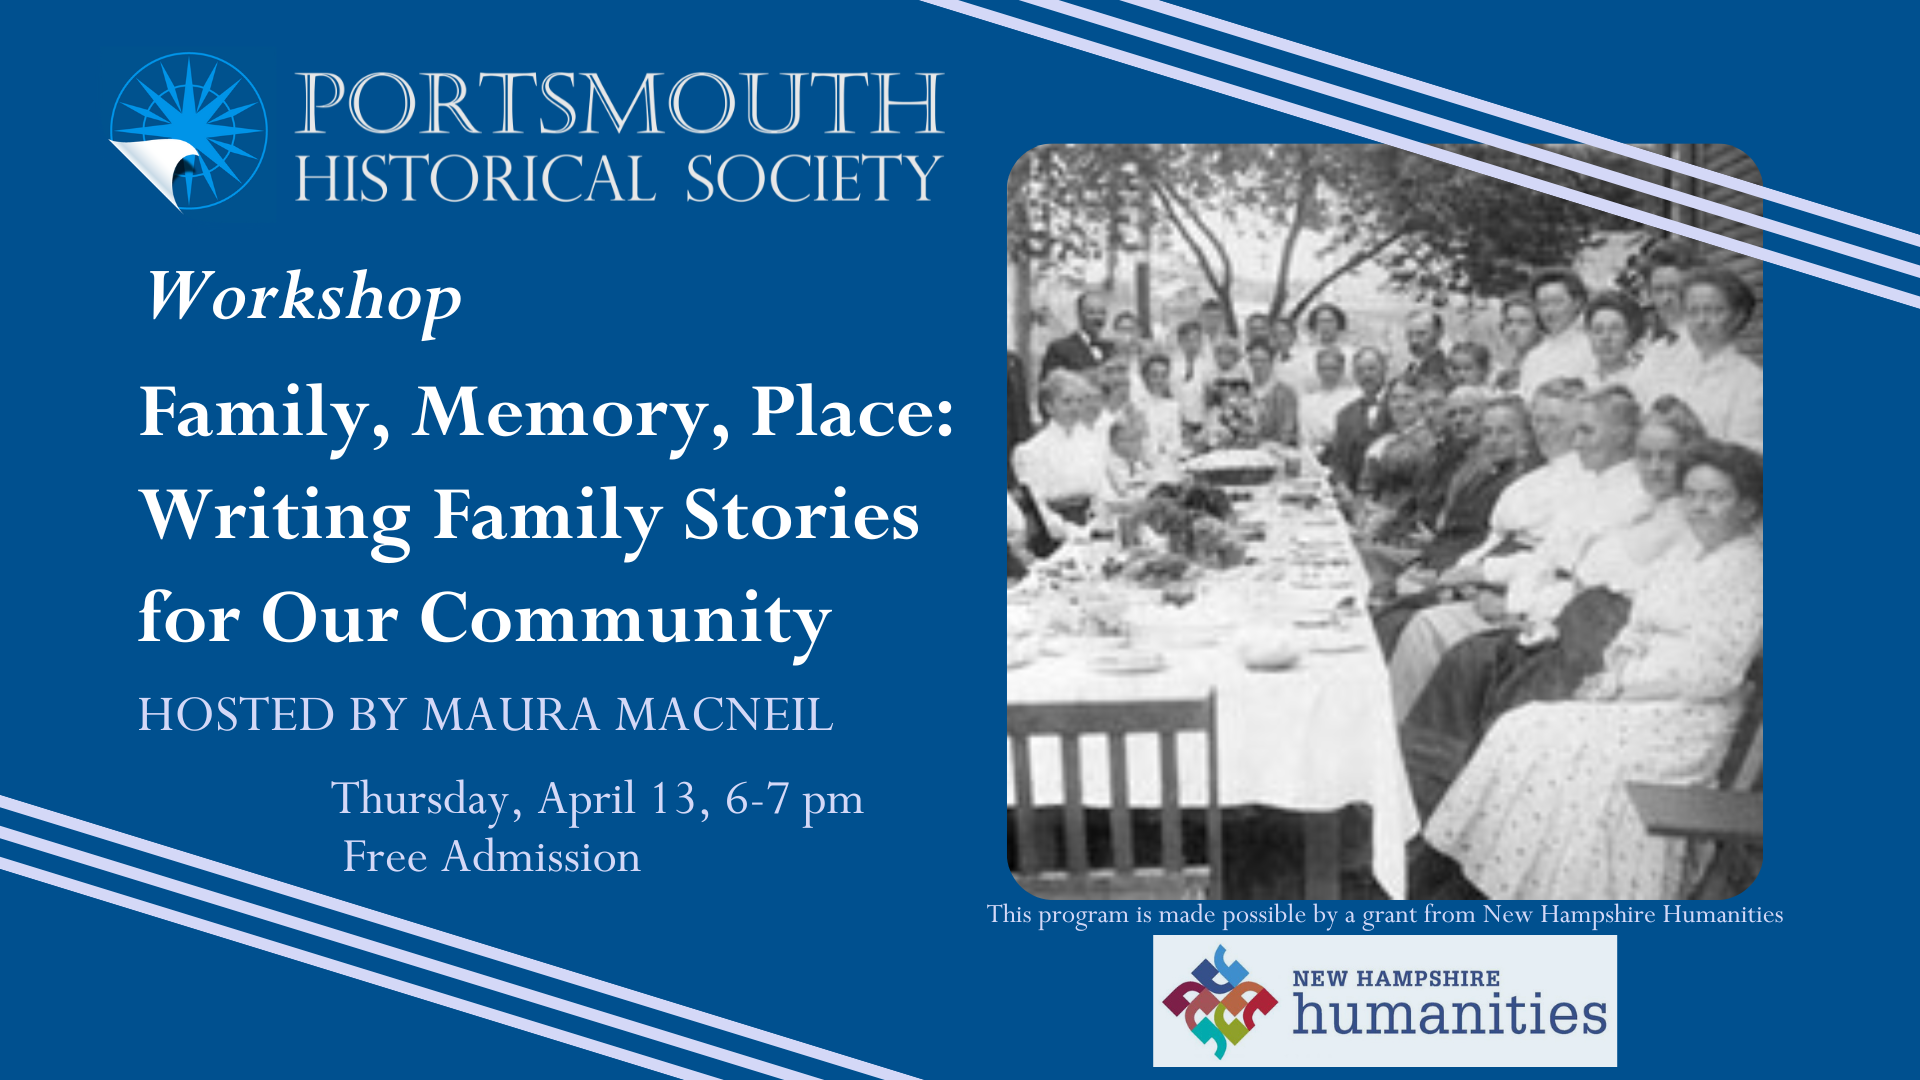 Workshop on 4/13 at 7pm Family, Memory, Place: Writing Family Stories for Our Community.